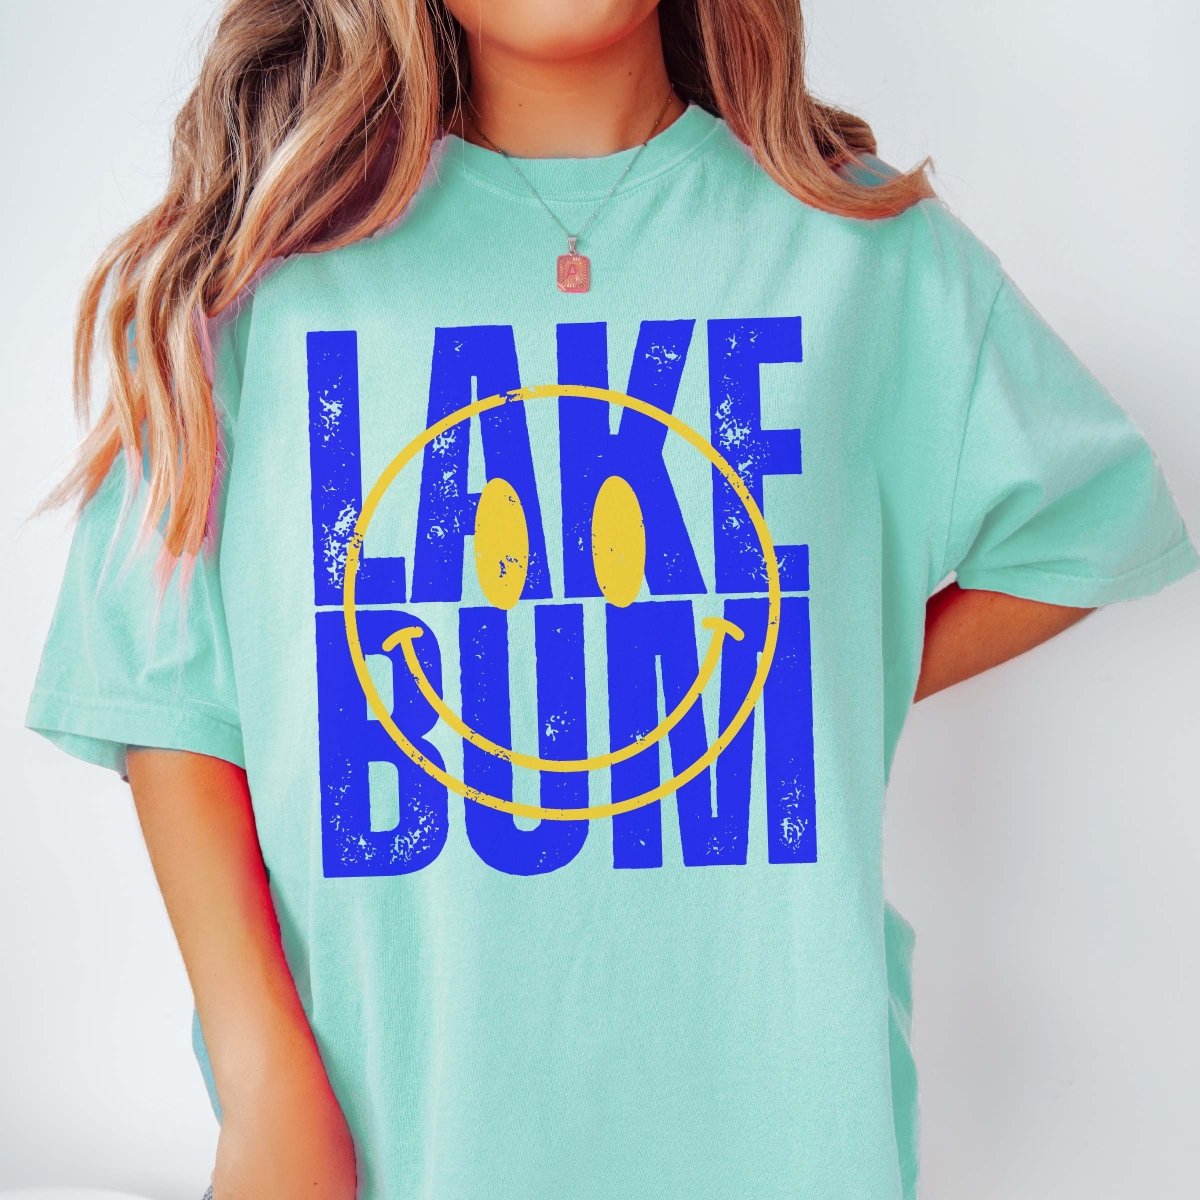 Lake Bum Smile Comfort Color Wholesale Tee - Fast Shipping - Limeberry Designs